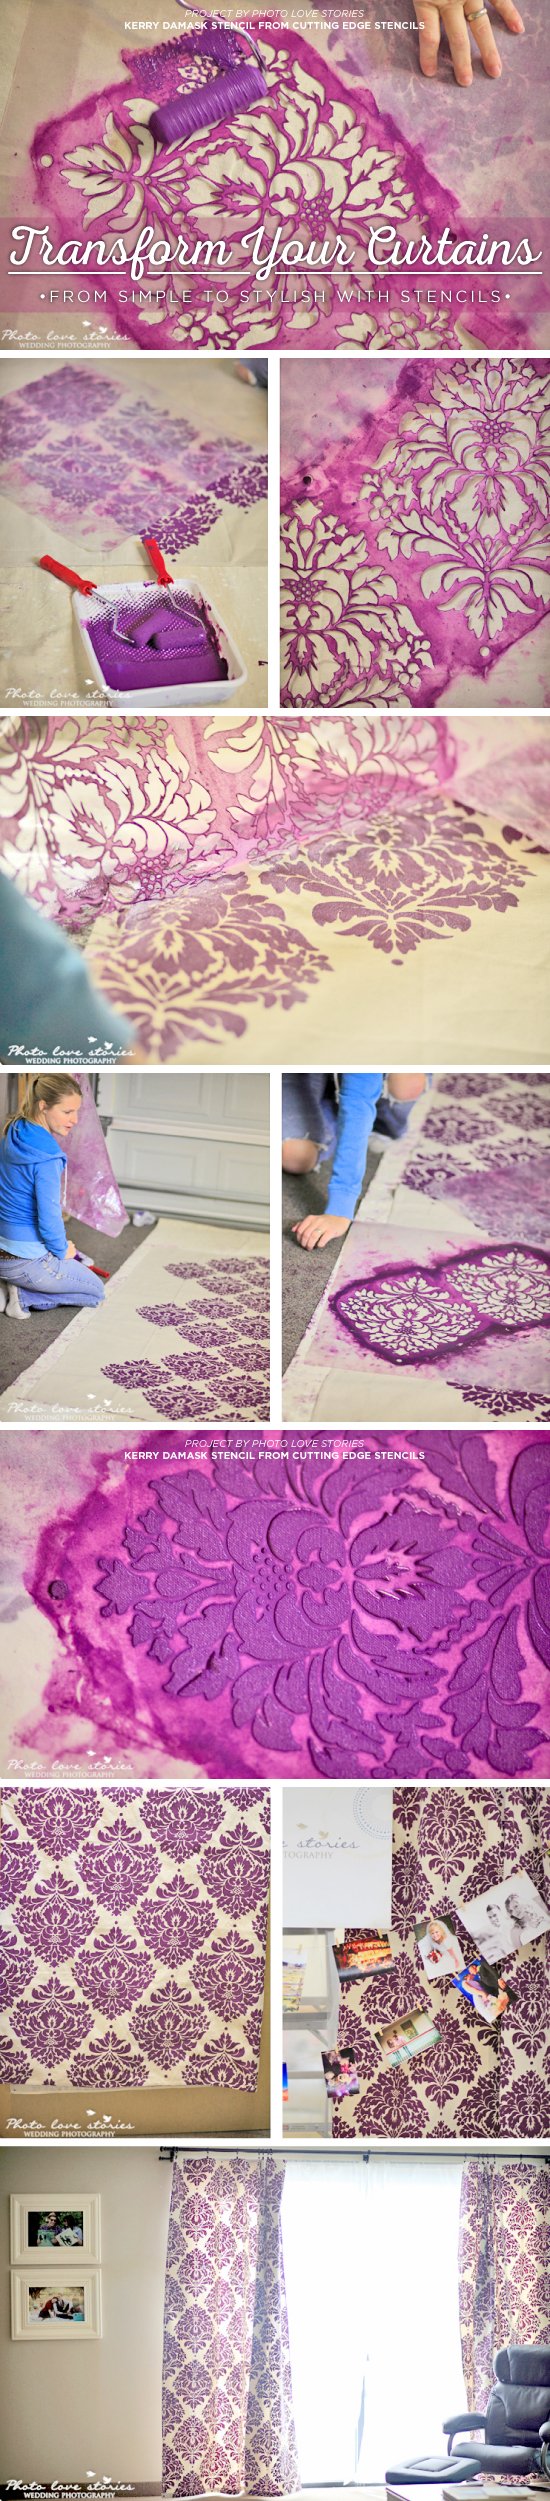 Cutting Edge Stencils shares how to stencil curtains using the Kerry Damask Stencil. http://www.cuttingedgestencils.com/wall-damask-kerry.html